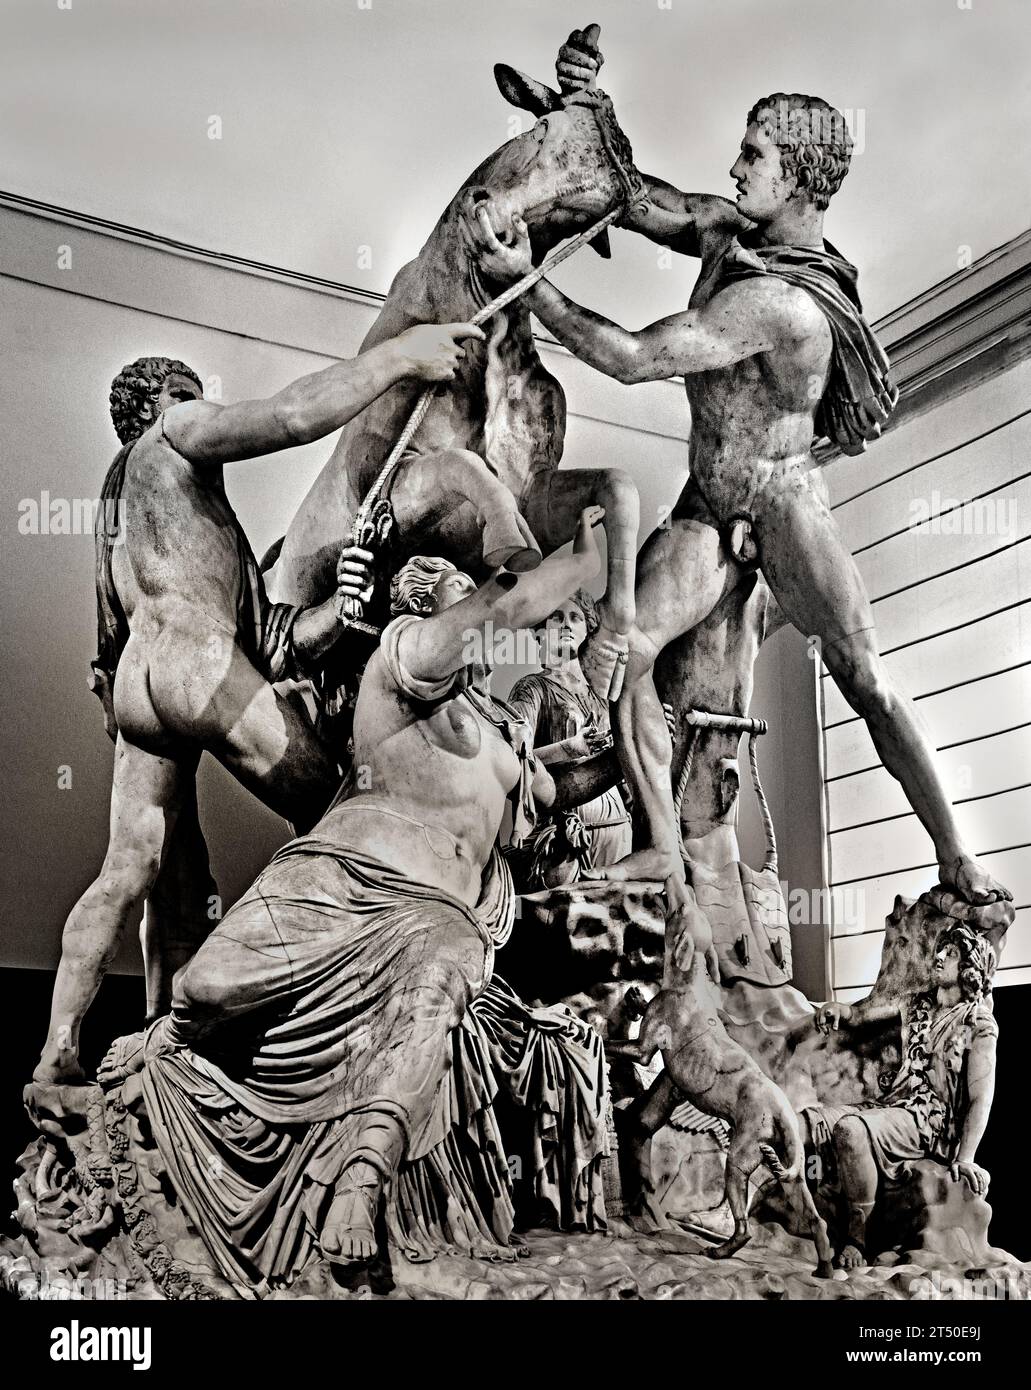 Punishment of Dirce  Il 'Toro Farnese'  Farnese Bull formerly in the Farnese collection in Rome, is a massive Roman elaborated copy of a Hellenistic sculpture.                            Severian period (A.D. 222-235)  National Archaeological Museum of Naples Italy. Roman, (2nd century) Stock Photo